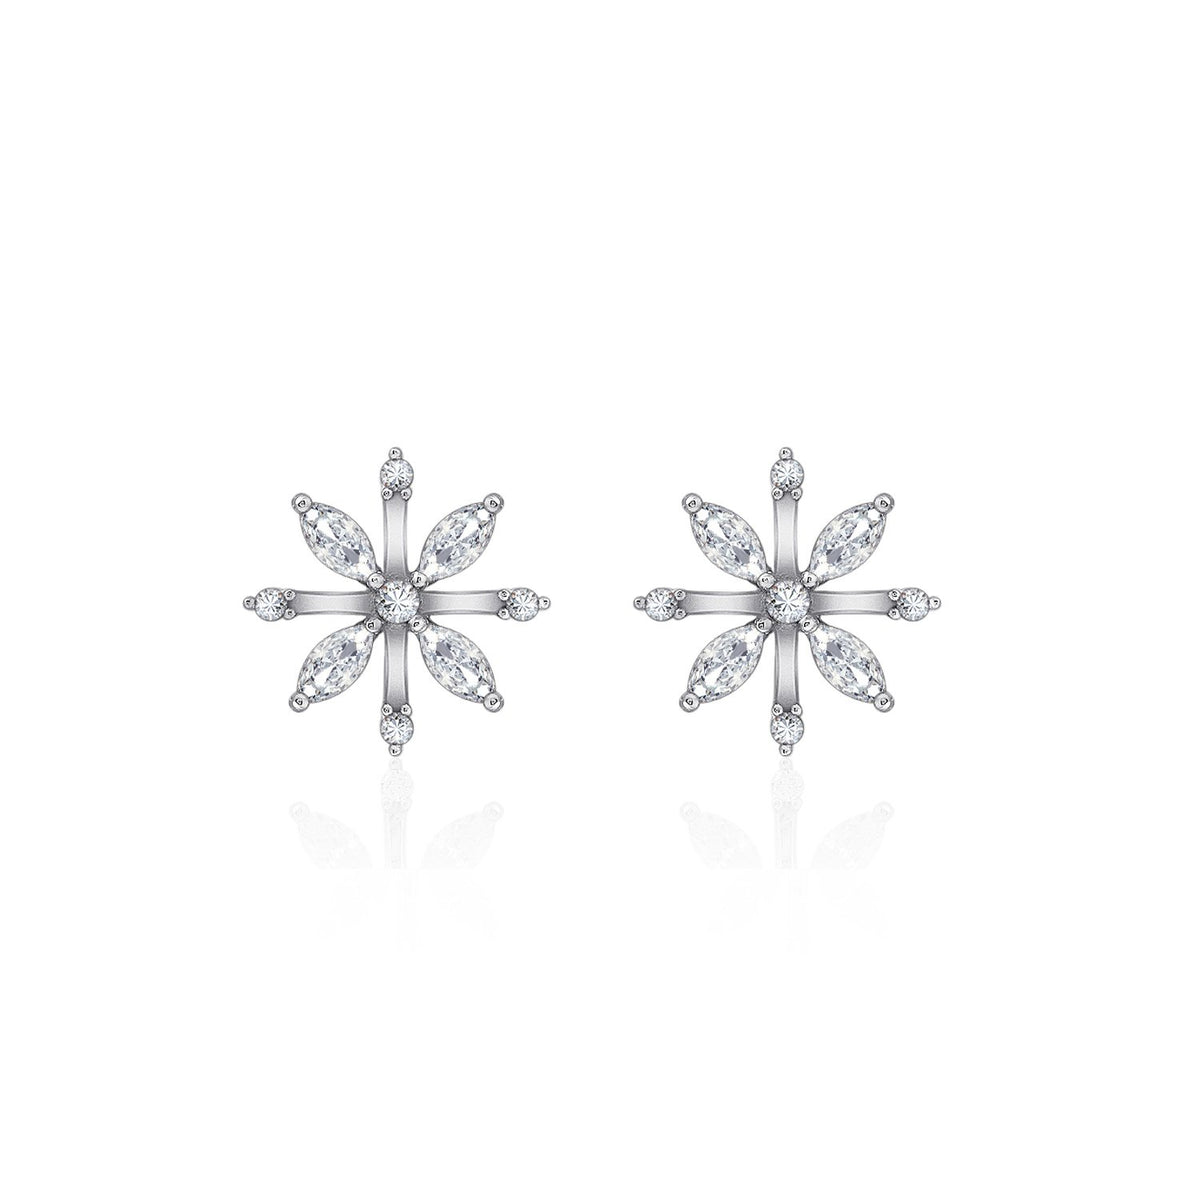 GEMOUR Marquise And Round Cubic Zirconia Snowflake Stud Earrings - GEMOUR